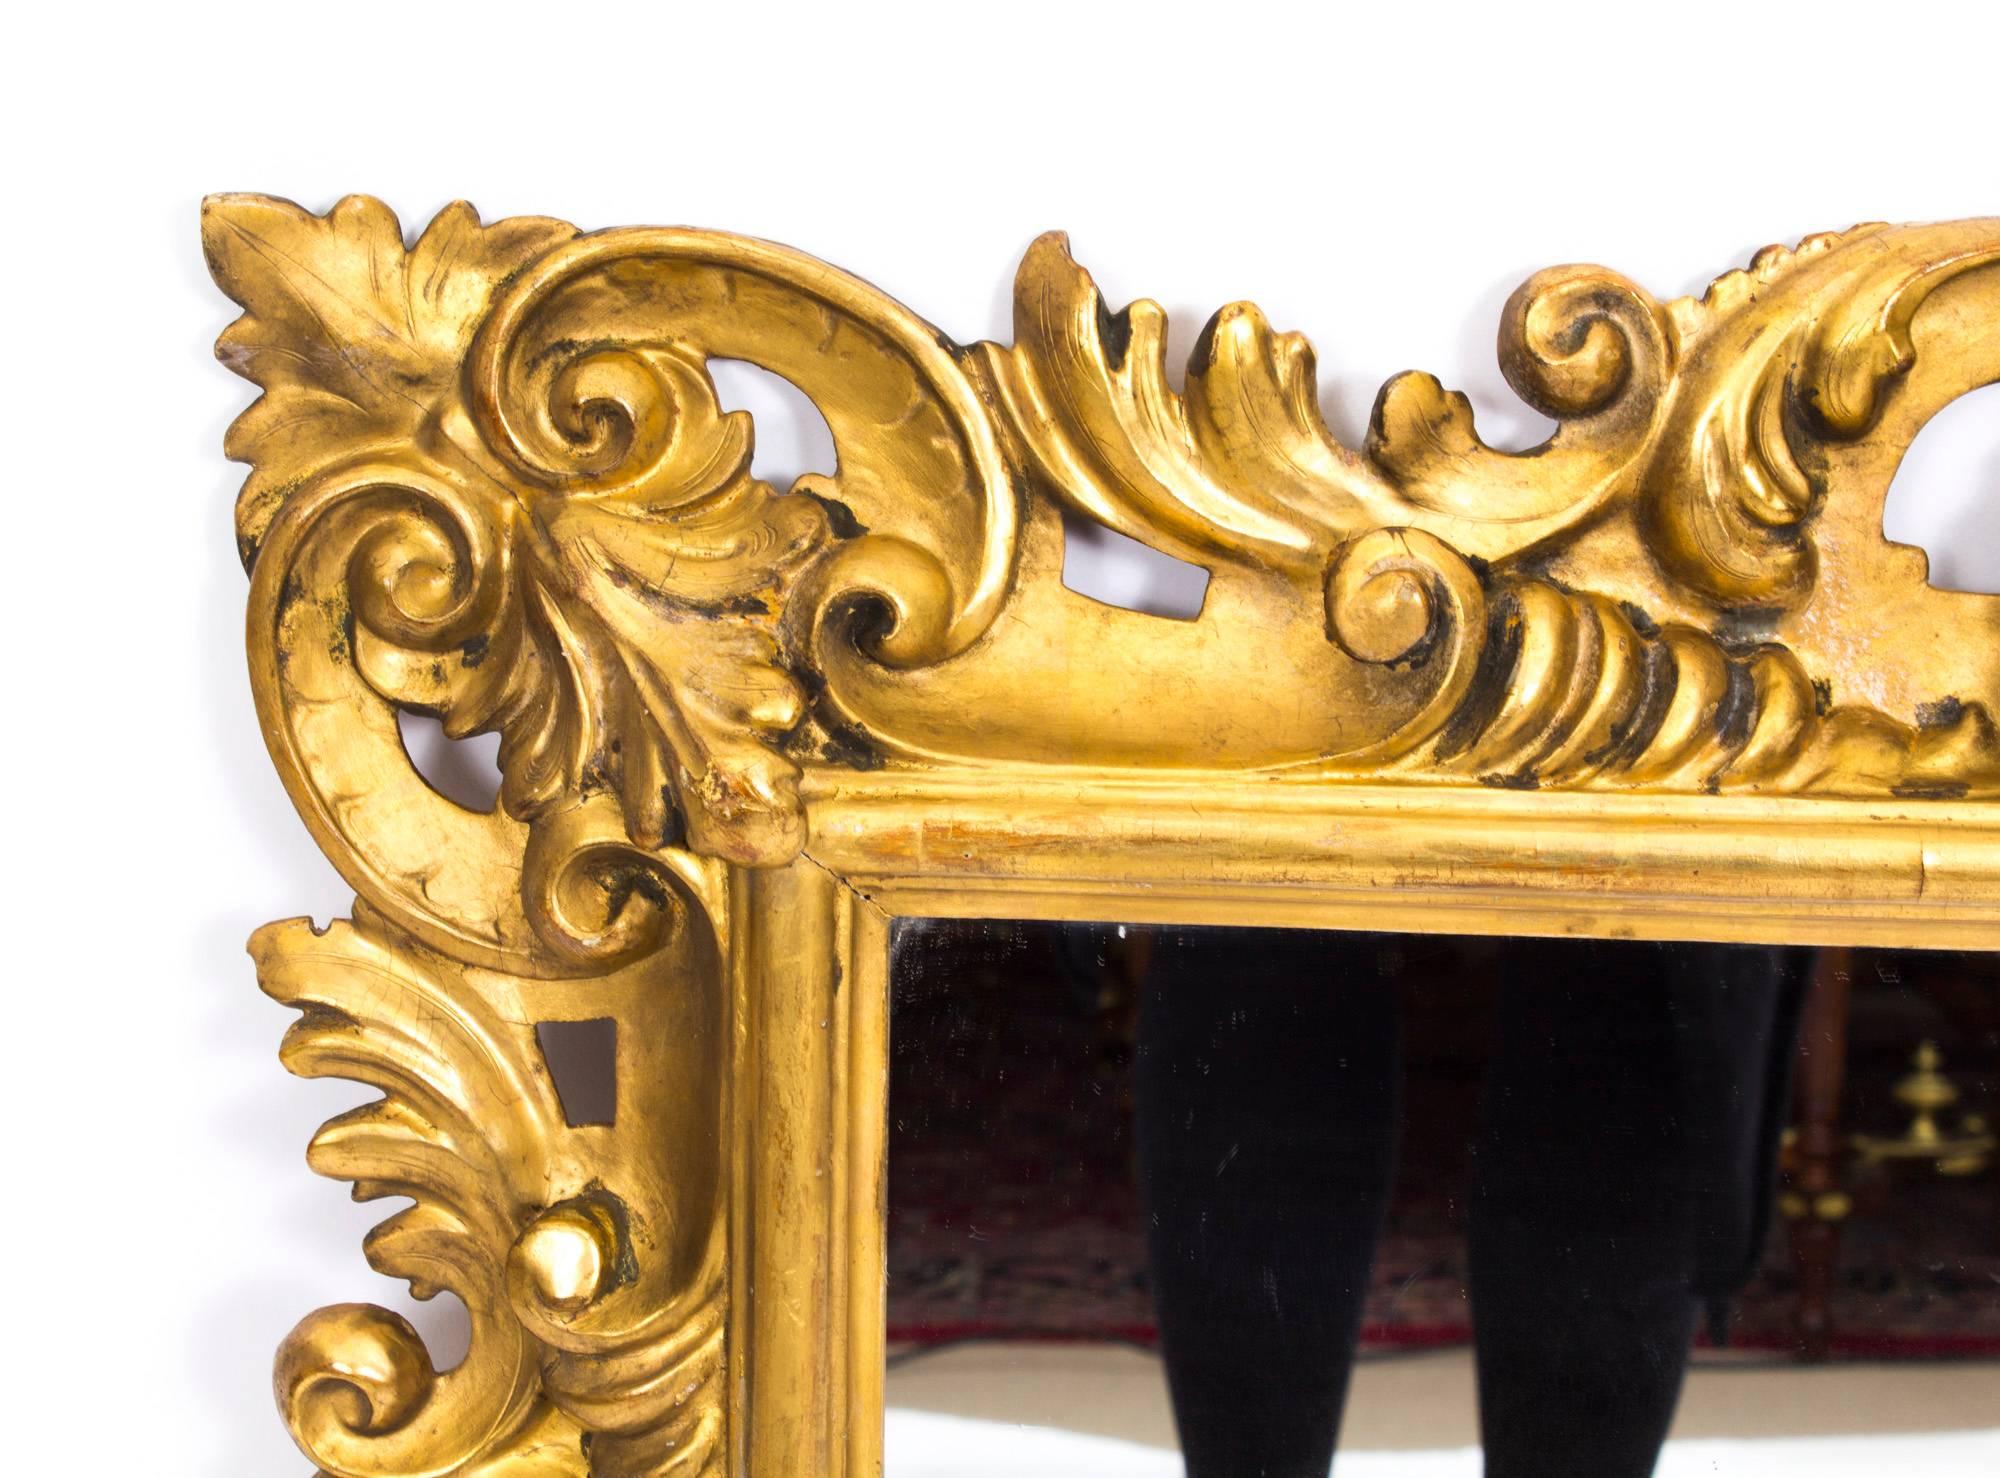 This is a beautiful antique Italian Florentine giltwood mirror, dating from the late 19th century.

The rectangular original mirror plate is within a pierced scrolling foliate and shell carved frame.

This is a very decorative item which will